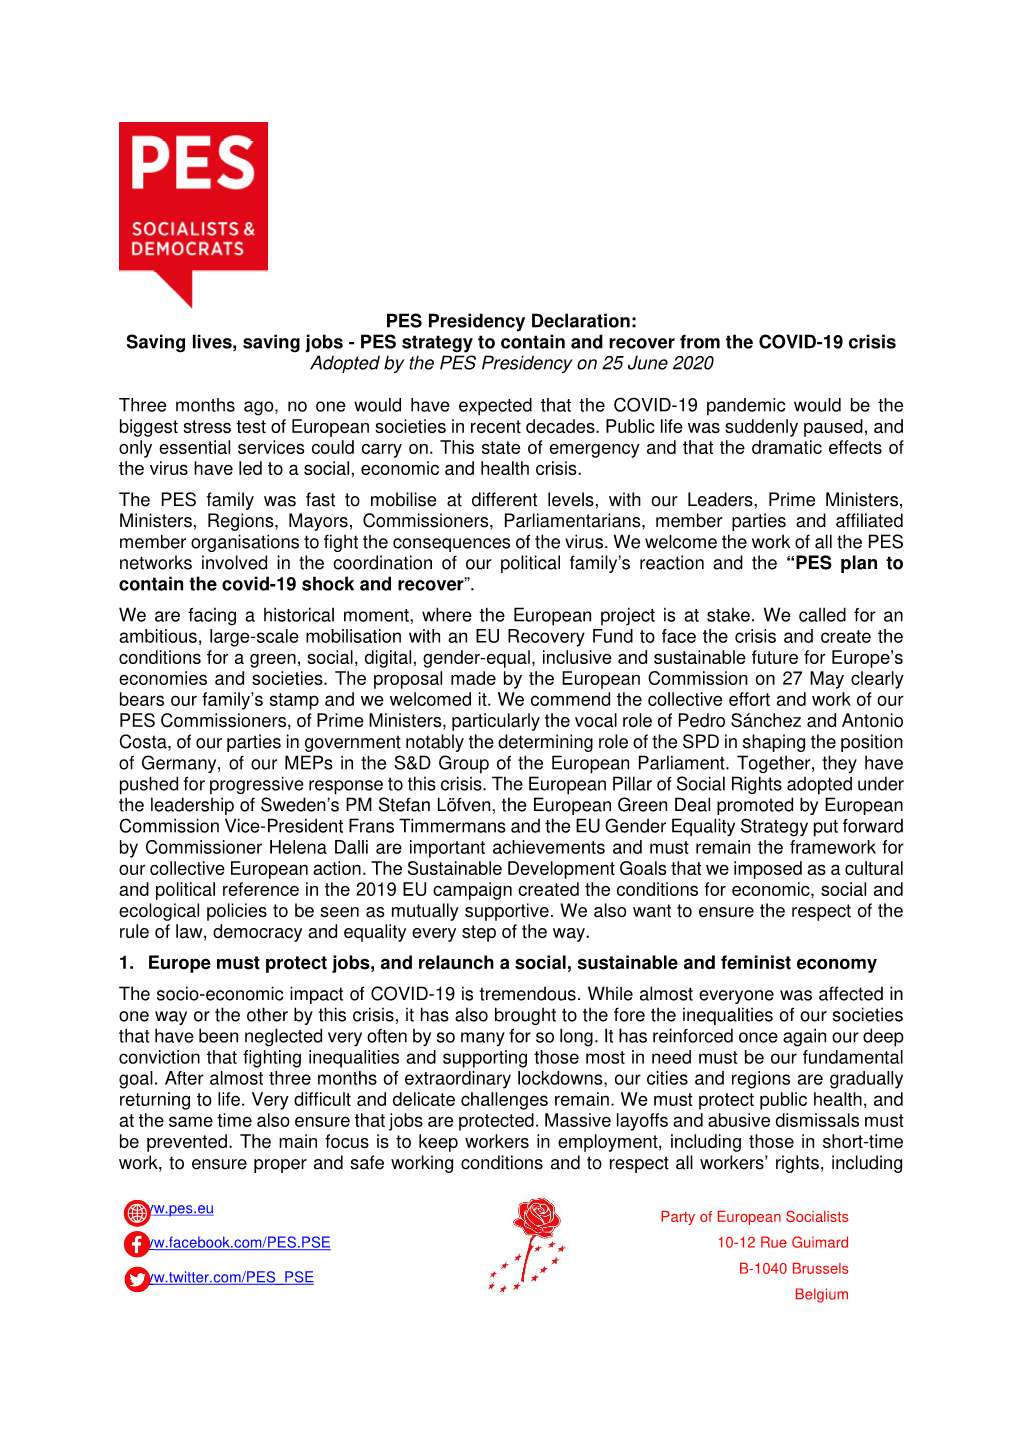 PES Presidency Declaration: Saving Lives, Saving Jobs - PES Strategy to Contain and Recover from the COVID-19 Crisis Adopted by the PES Presidency on 25 June 2020